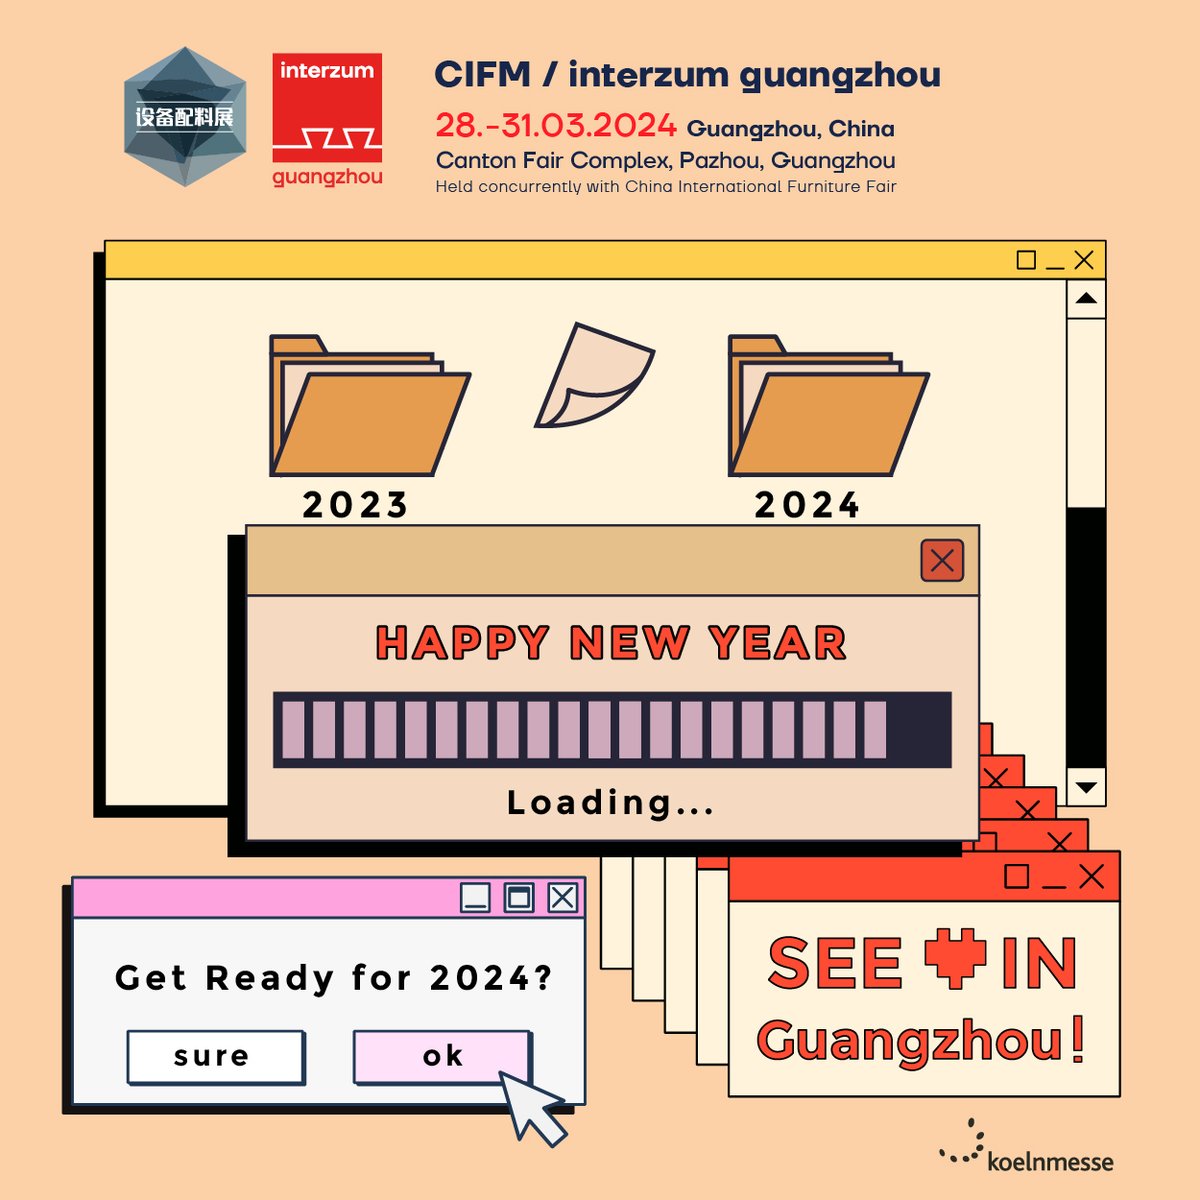 May 2024 bring you and your loved ones joy, success, and fulfillment. Together, let us continue to foster growth and innovation in the industry. Cheers to a new beginning! 🥰🎉
#koelnmesse #interzumguangzhou #2024newyear